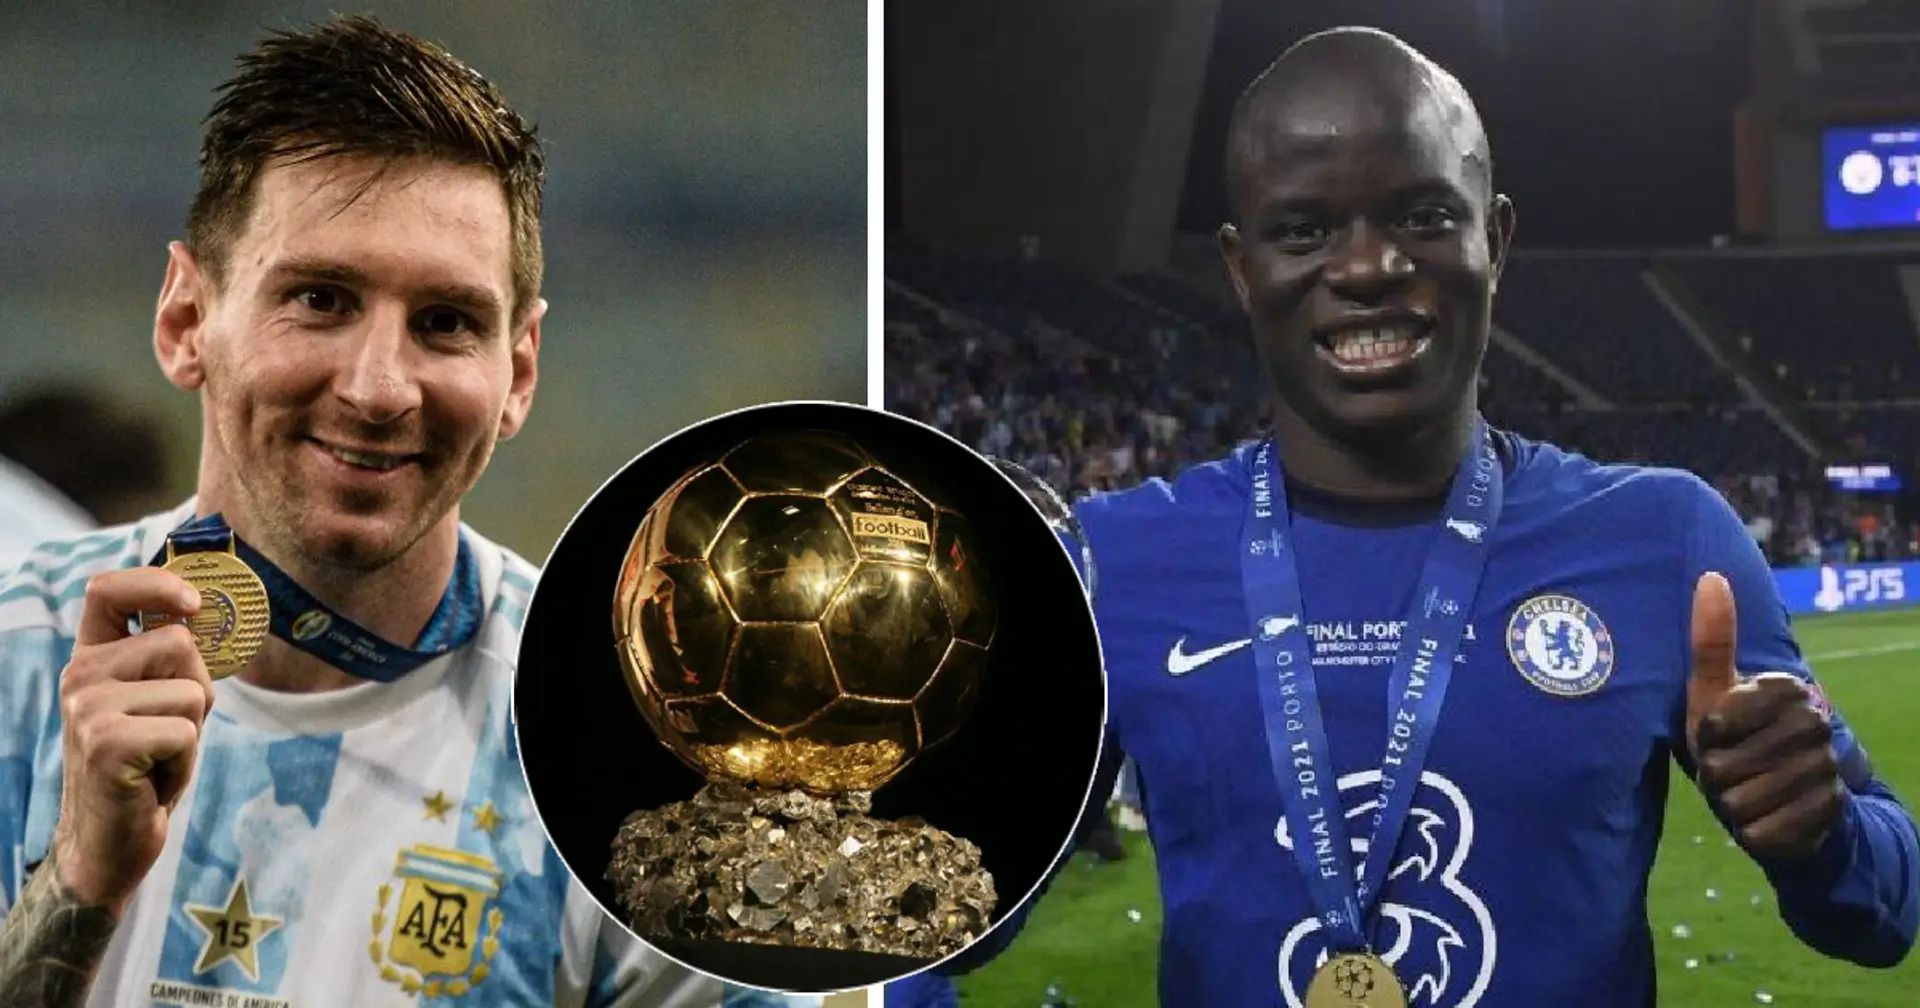 2020/21 Ballon d'Or odds: Kante in 4th, one more Blue included as Messi leads race